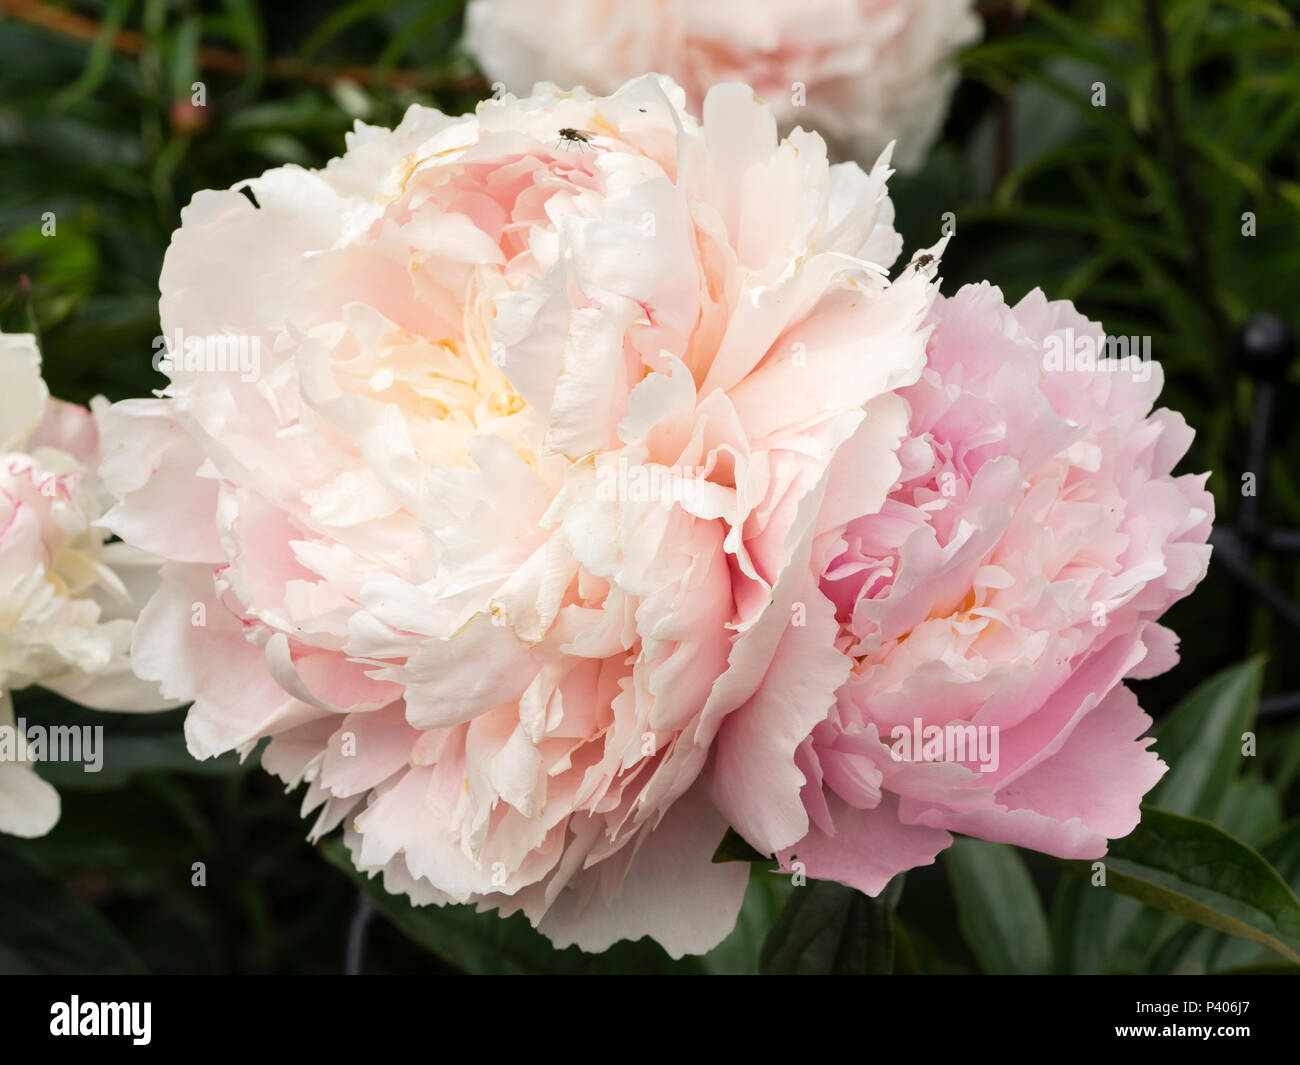 Heavily doubled fragrant pink flowers of the early summer blooming herbaceous peony, Paeonia lactiflora 'Sarah Bernhardt' Stock Photo